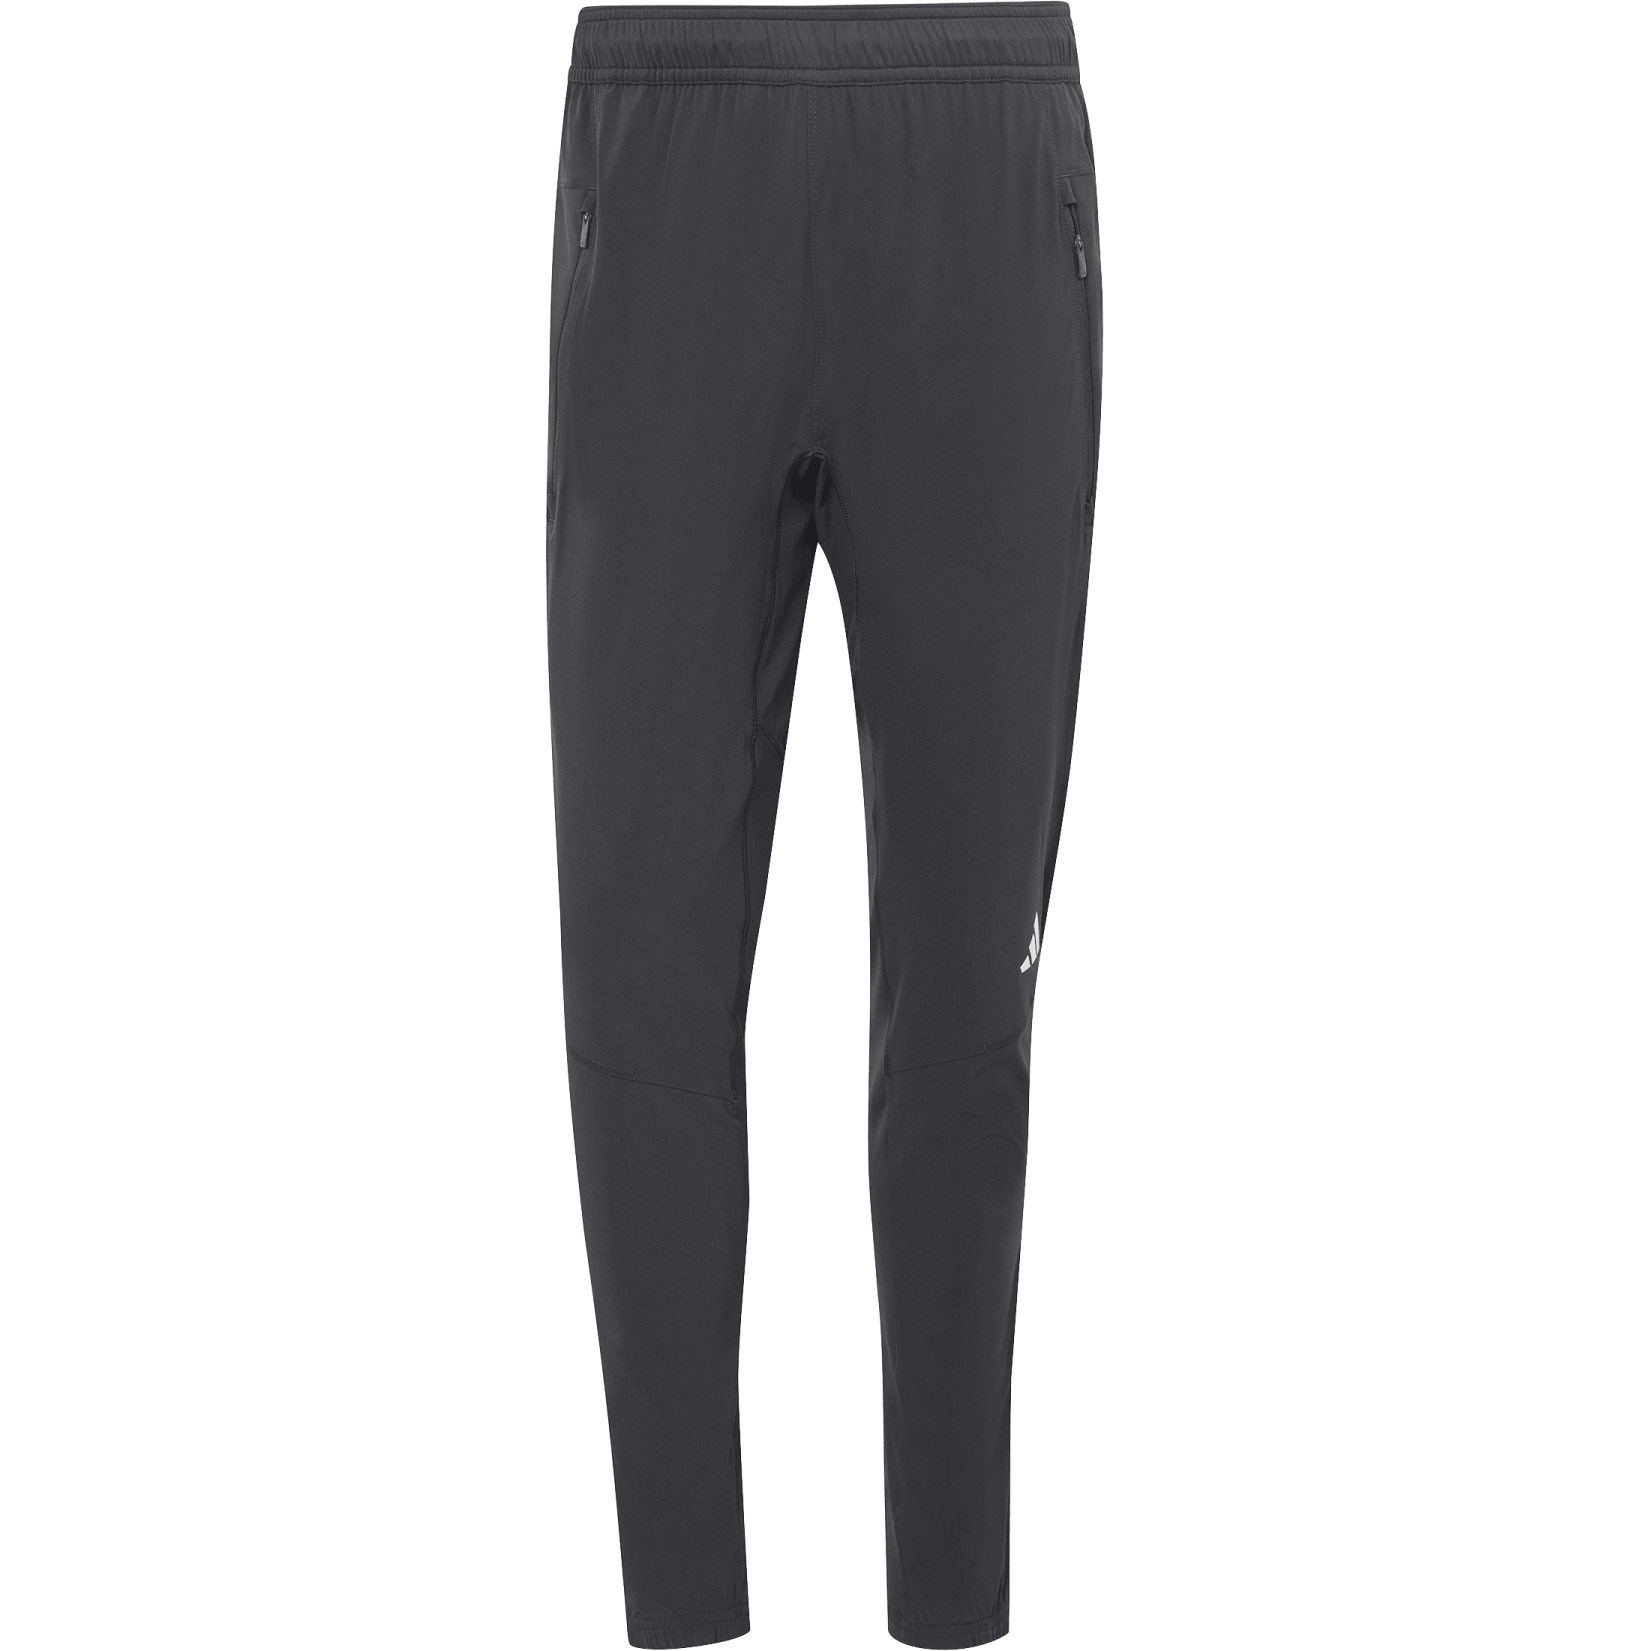 Picture of adidas Designed for Training Workout Pants Women - black IK9724